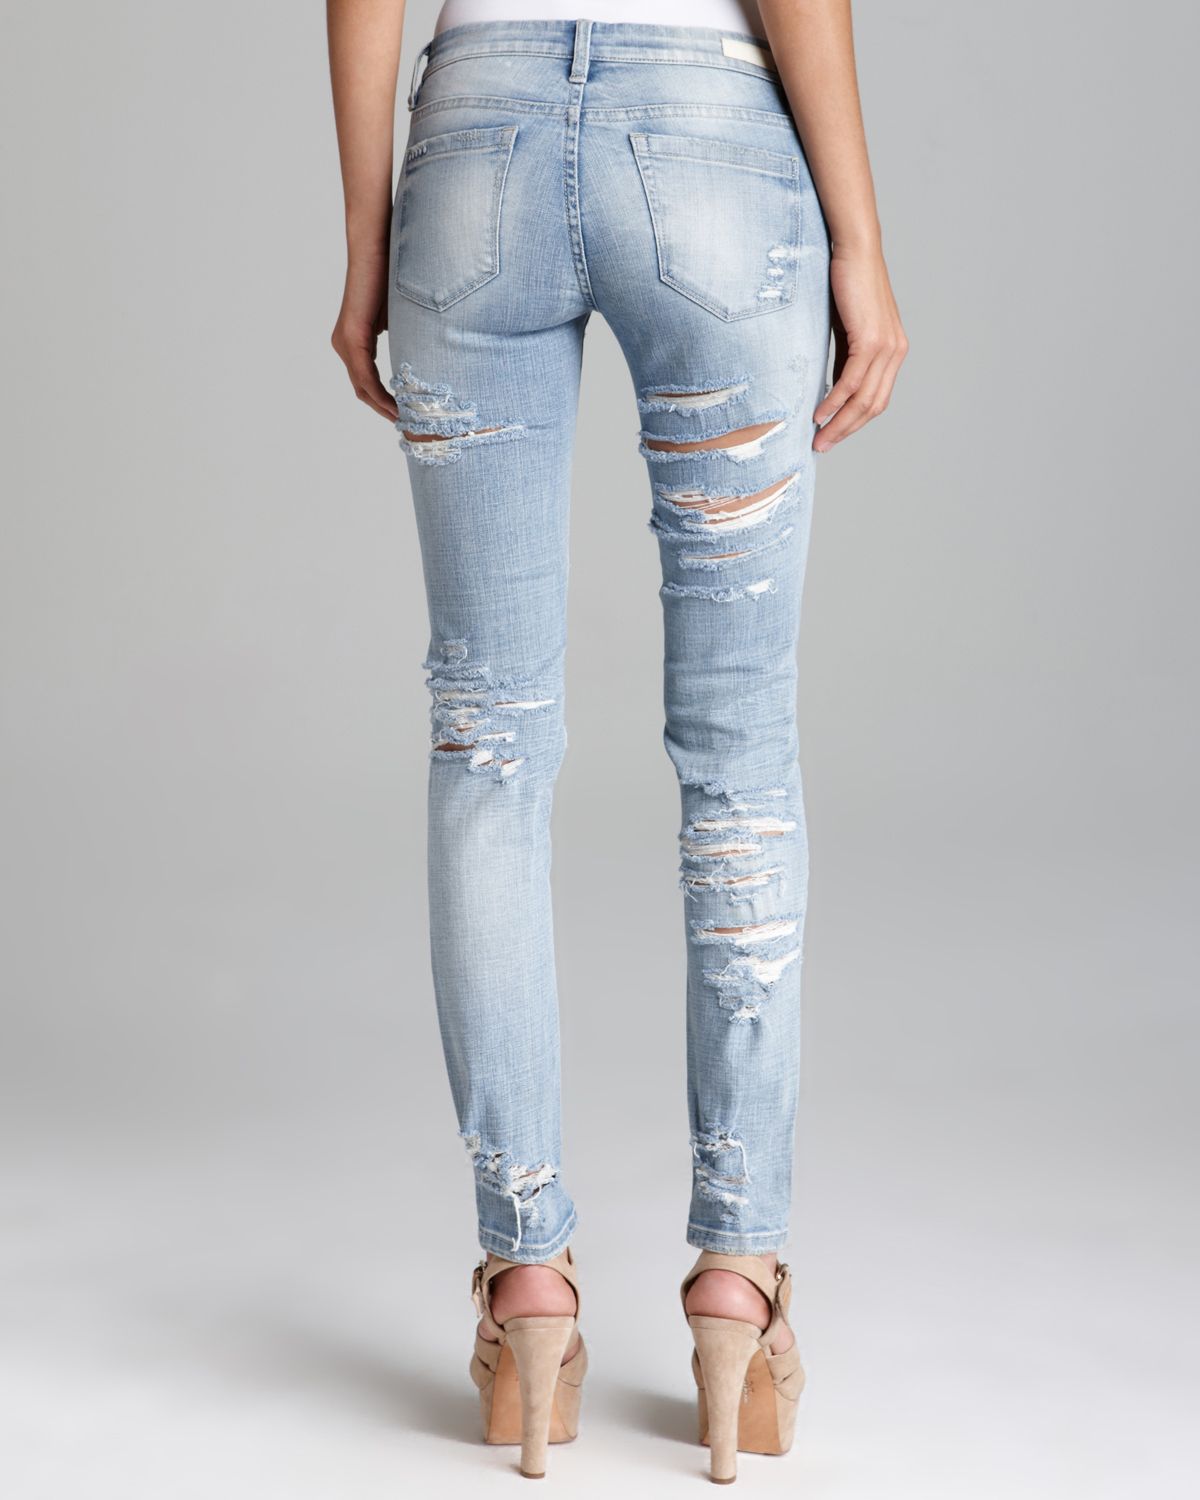 back and front ripped jeans